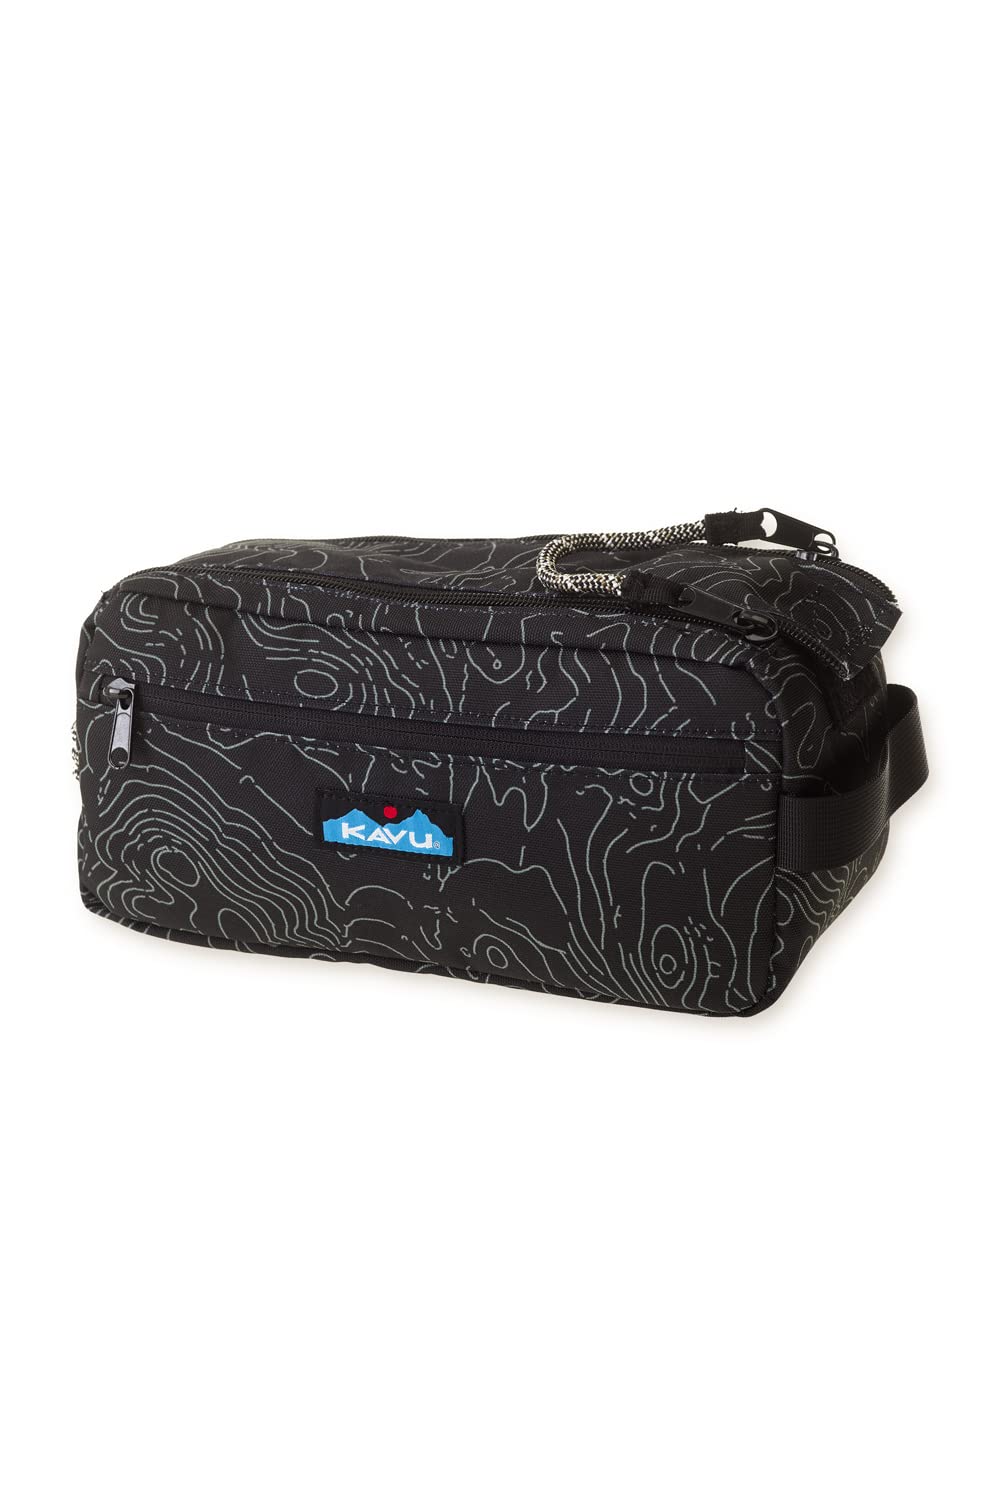 KAVU Grizzly Kit Accessory Bag Padded Lightweight Travel Case